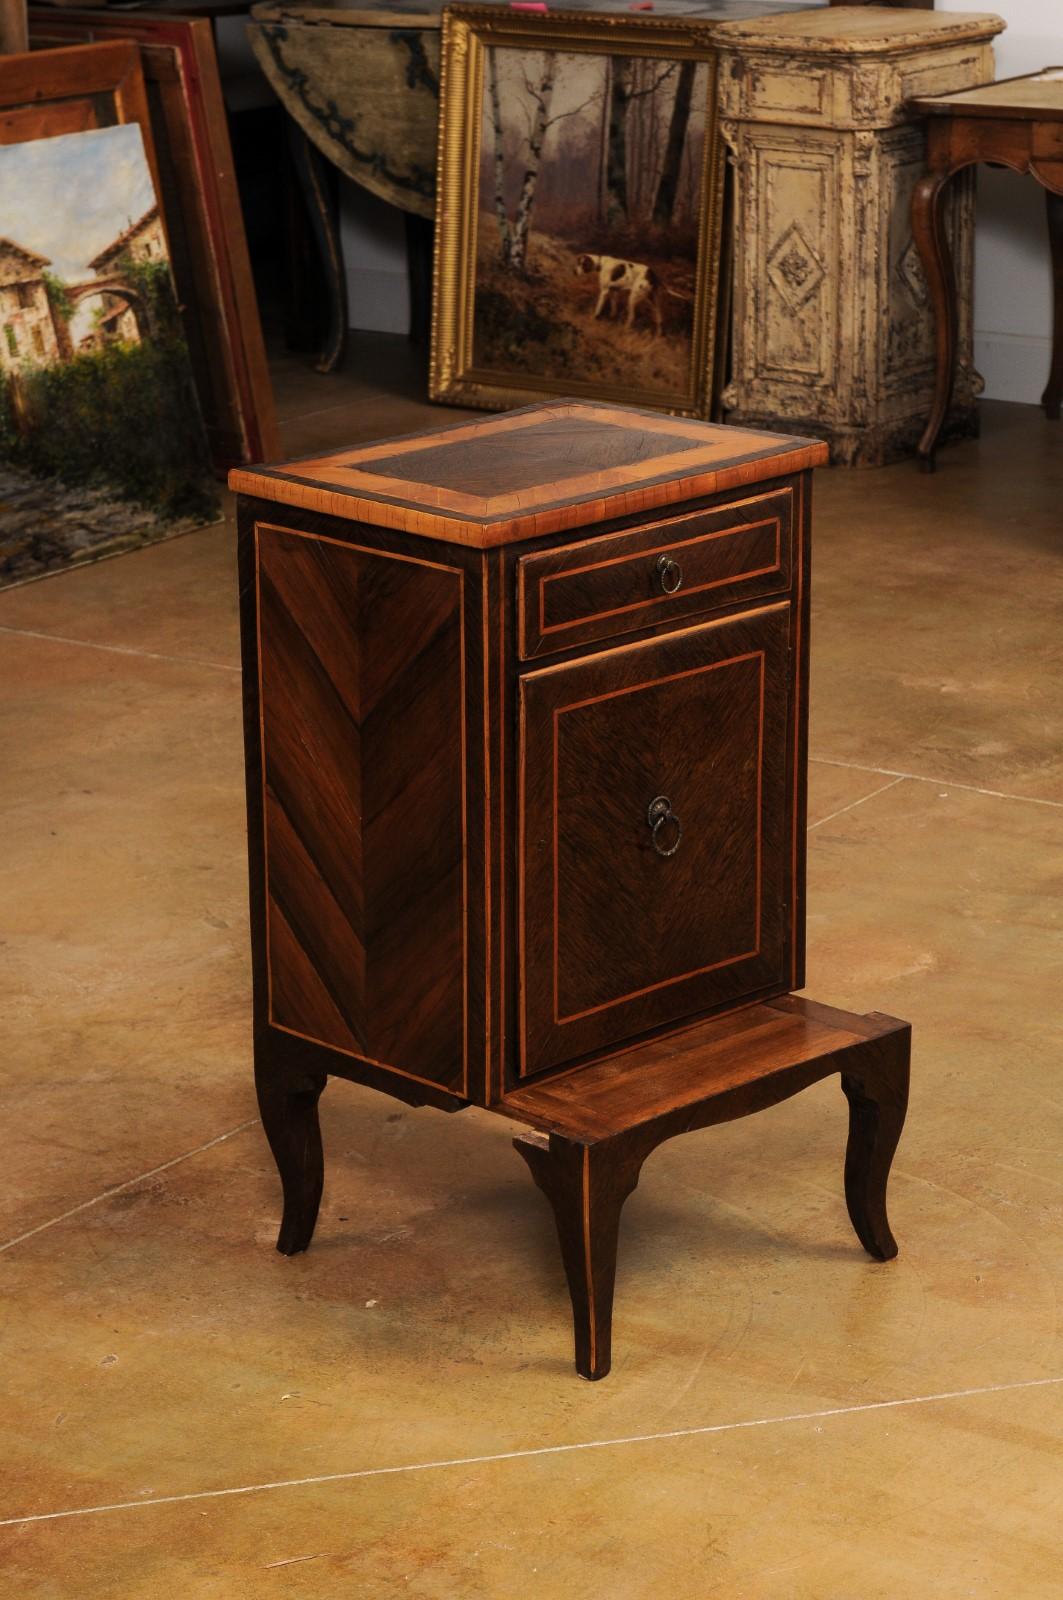 Italian 19th Century Bedside Table with Inlaid Décor, Single Drawer and Door For Sale 6